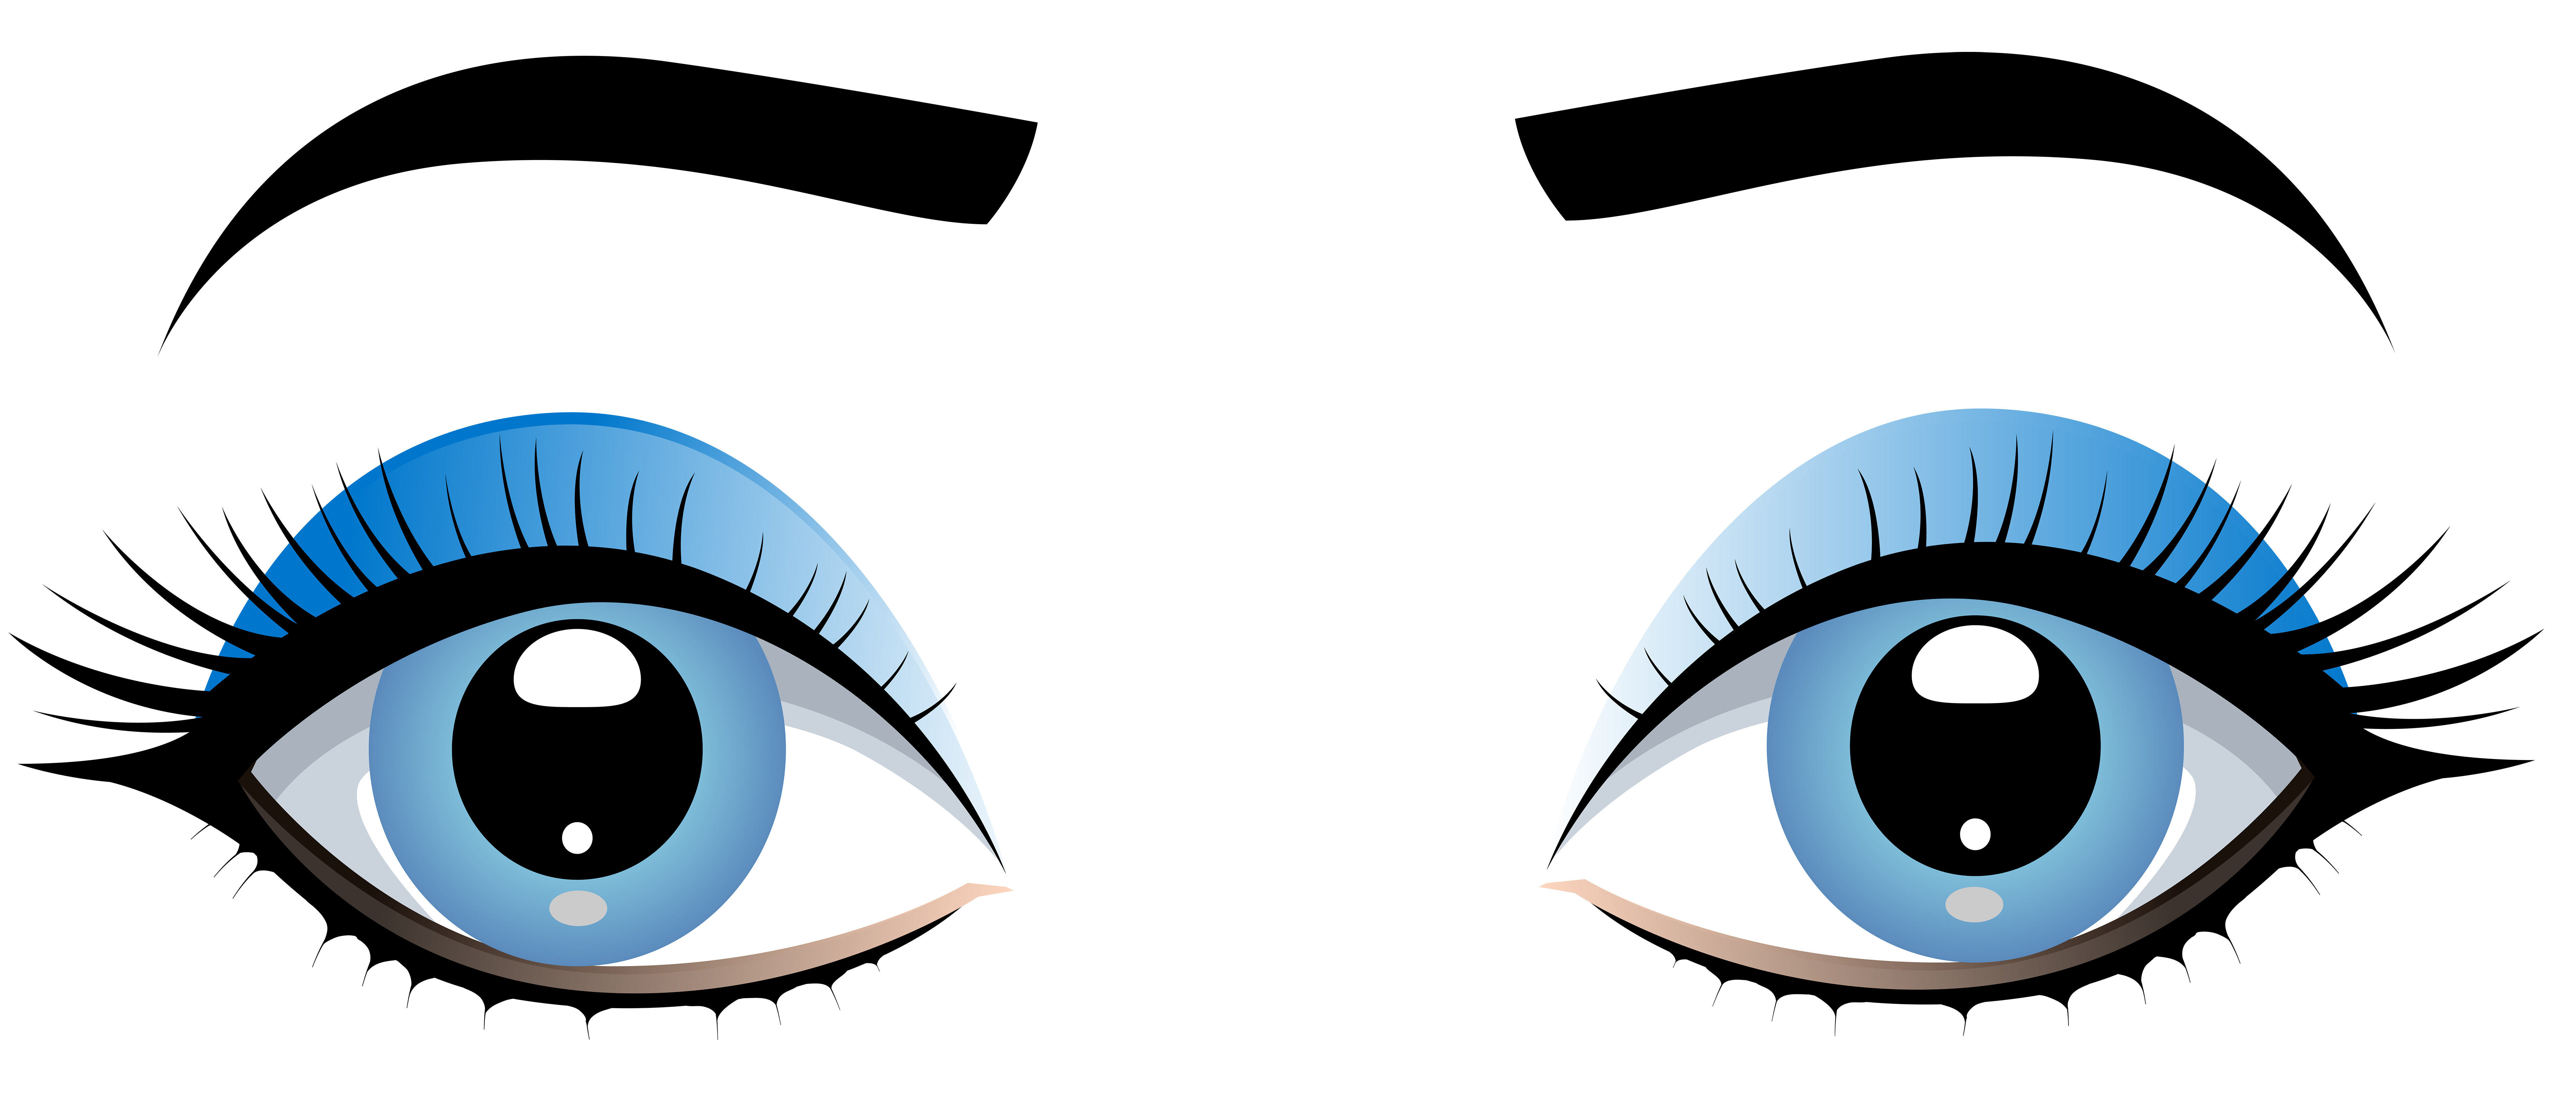 Pm8 Eyes Clipart